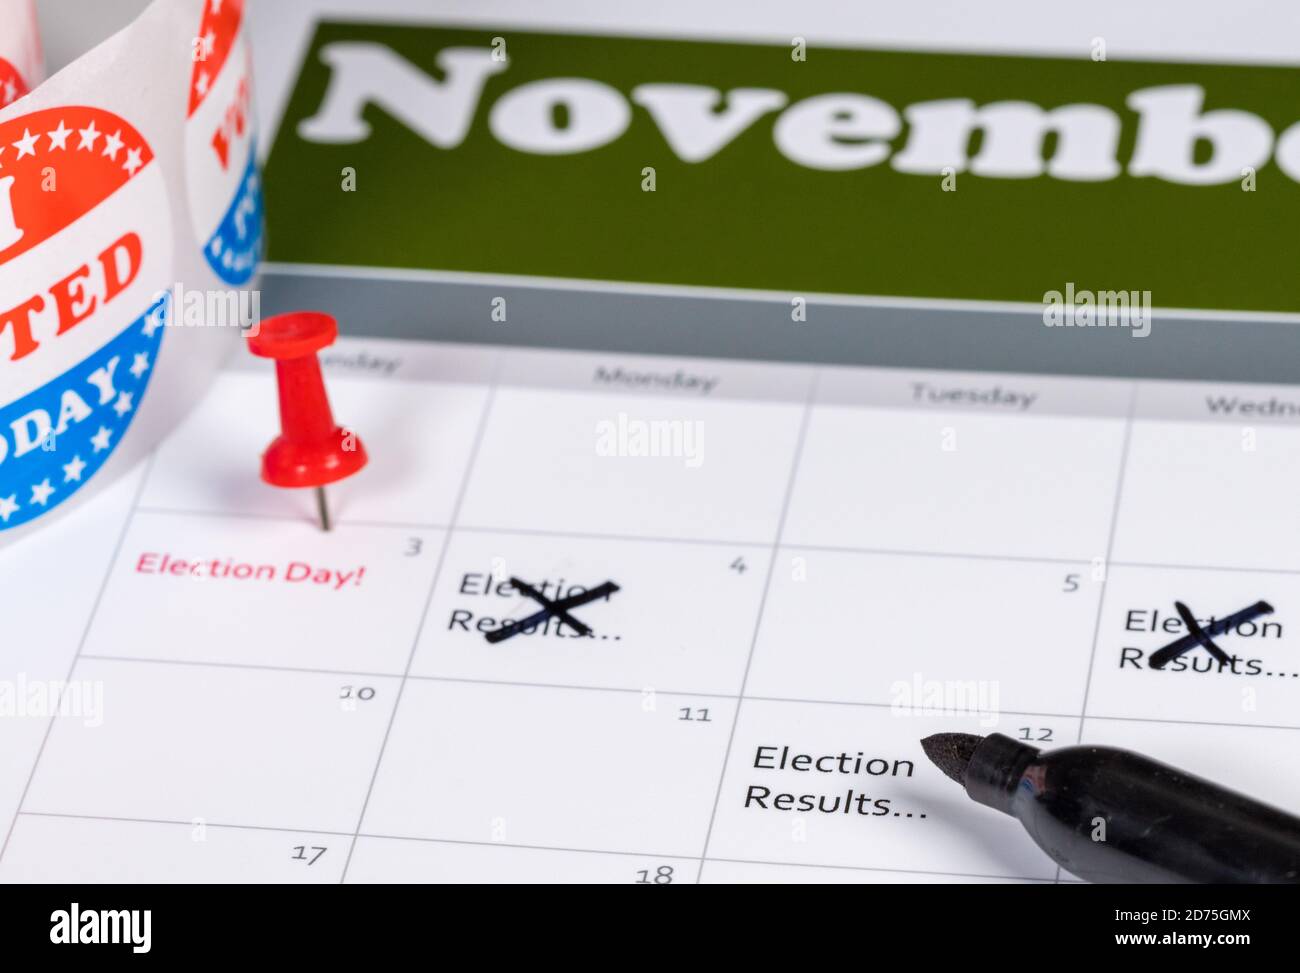 Calendar for November showing election day and various deleted reminders for results dues to delays in counting absentee ballot votes Stock Photo